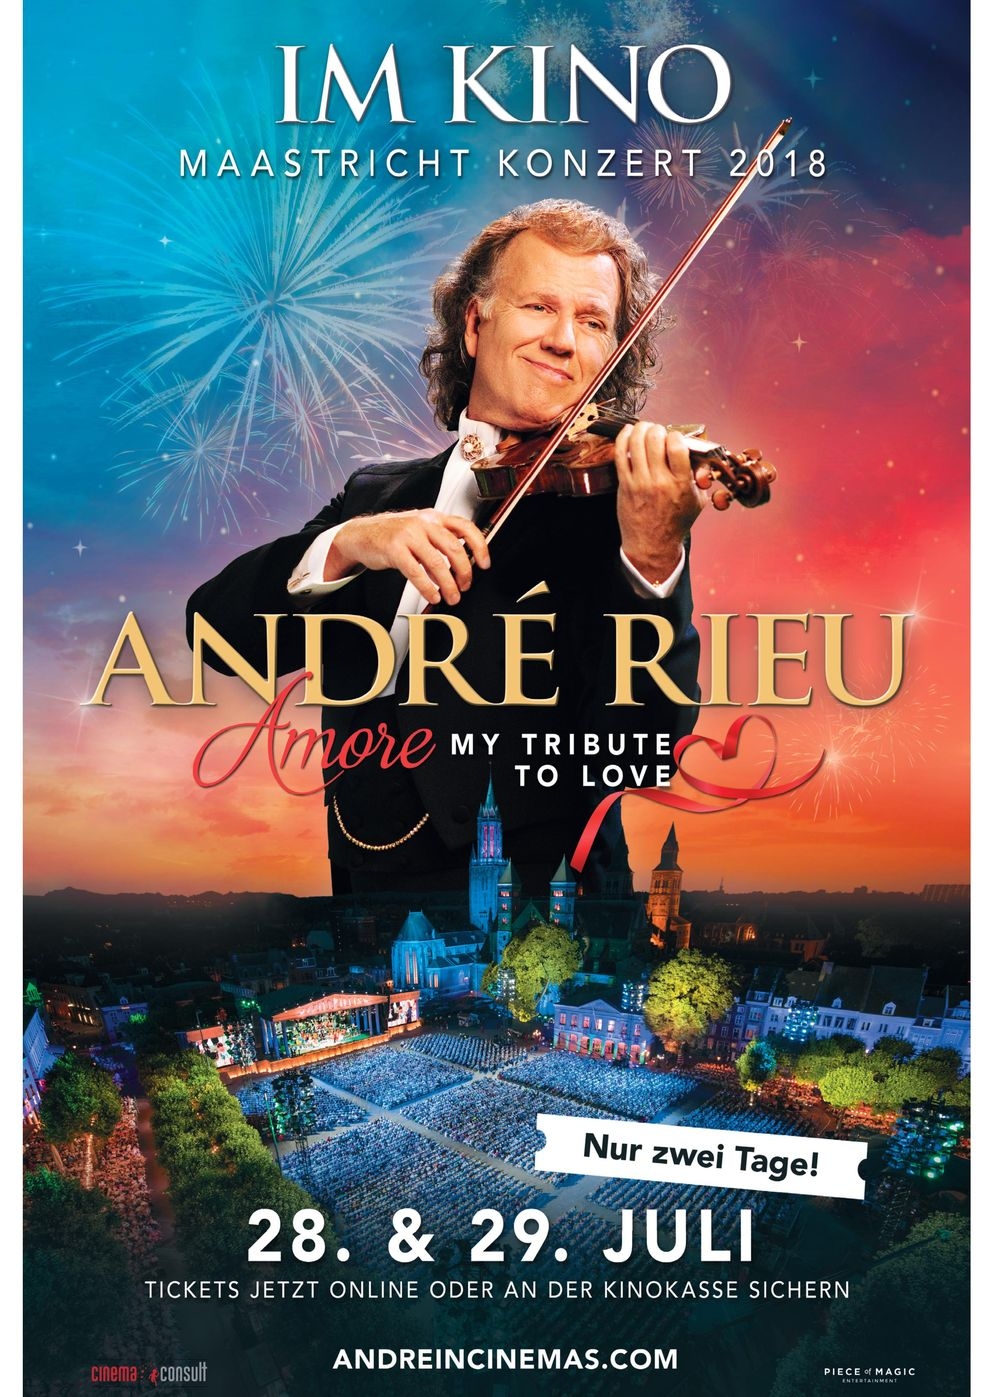 André Rieu - Maastricht-Konzert 2018: Amore - My Tribute to Love (Poster)